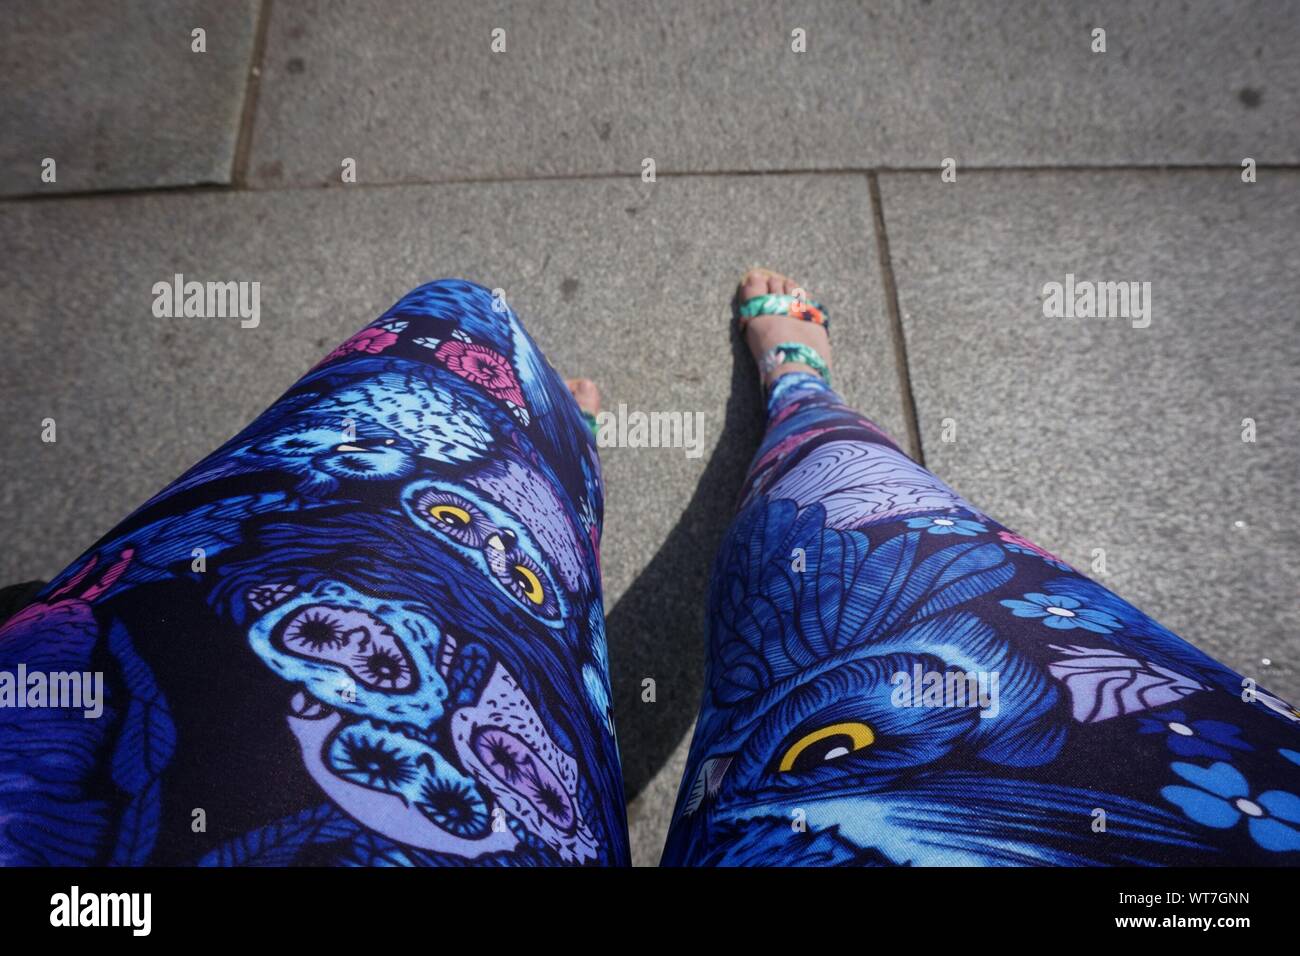 Low Section Of Woman Wearing Blue Leggings Stock Photo